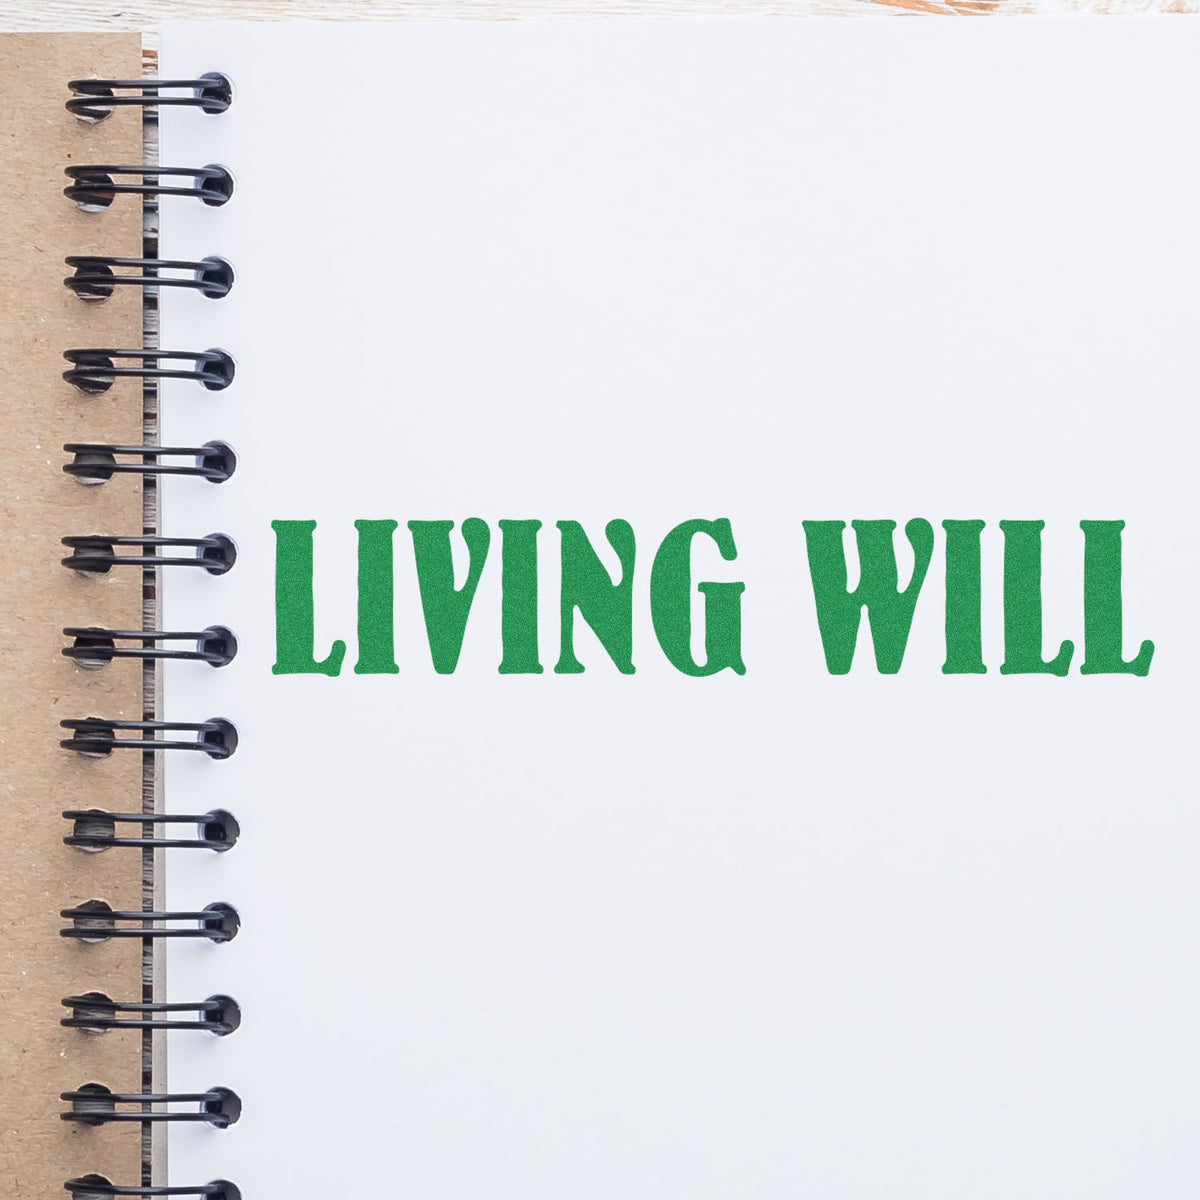 Living Will Rubber Stamp In Use